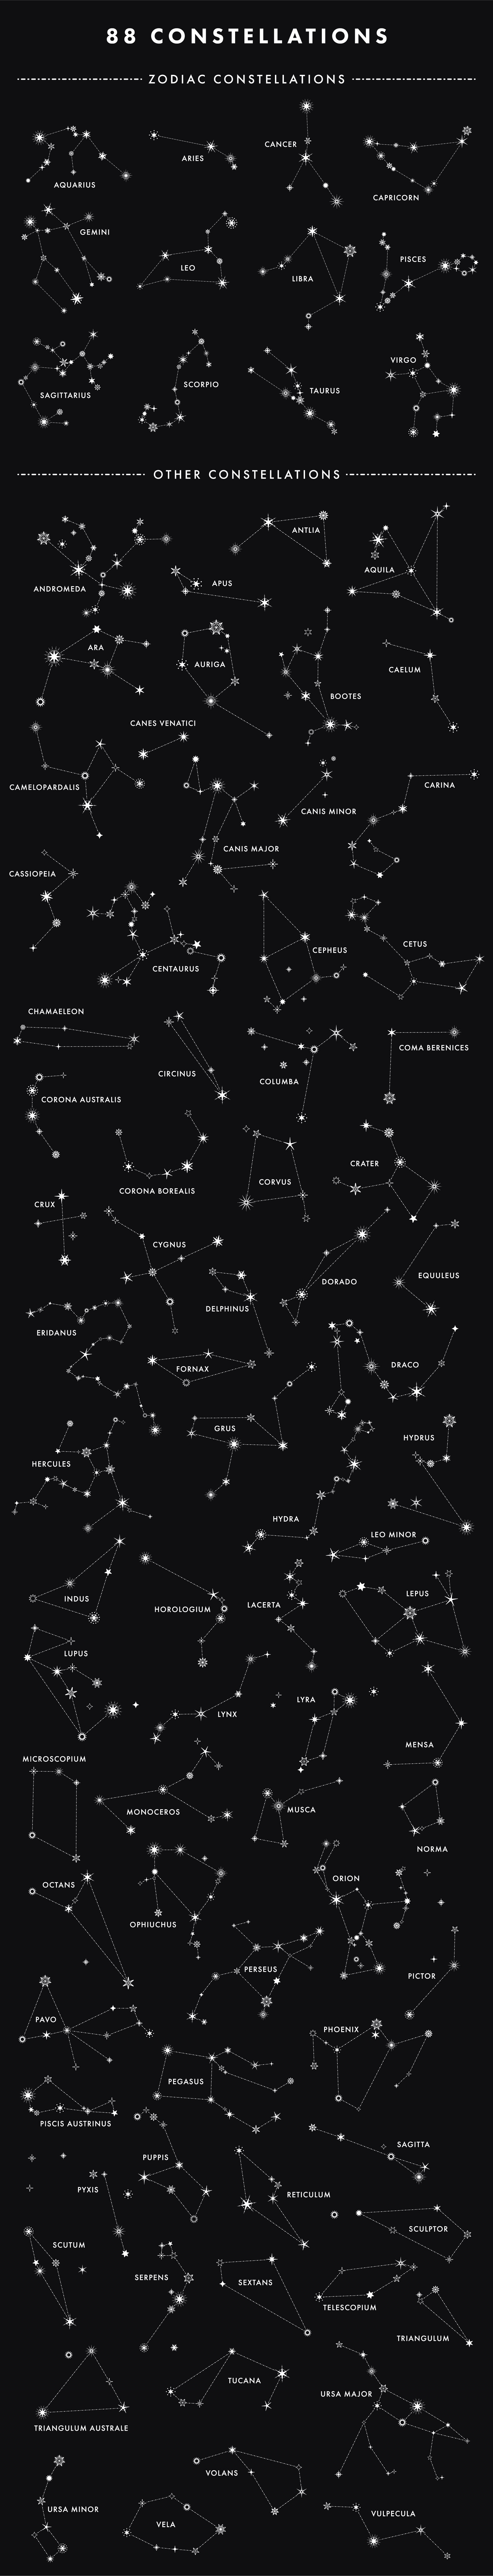 88 star constellations by megs lang prvw 011 415